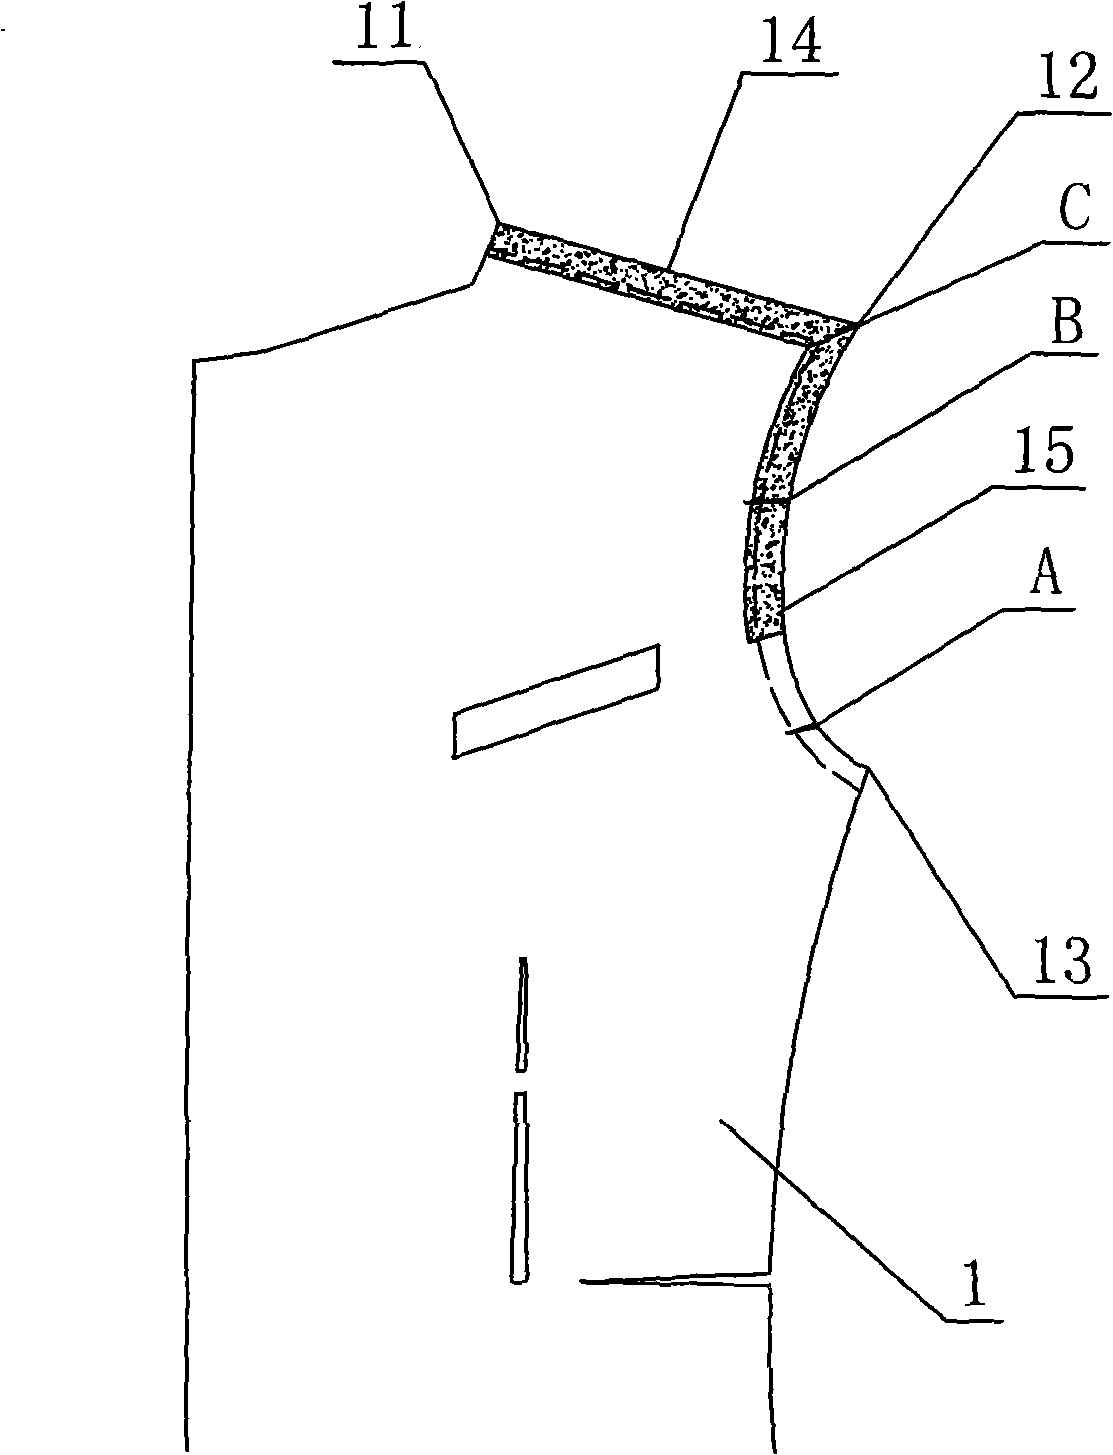 Method for processing uniforms without shoulder pad